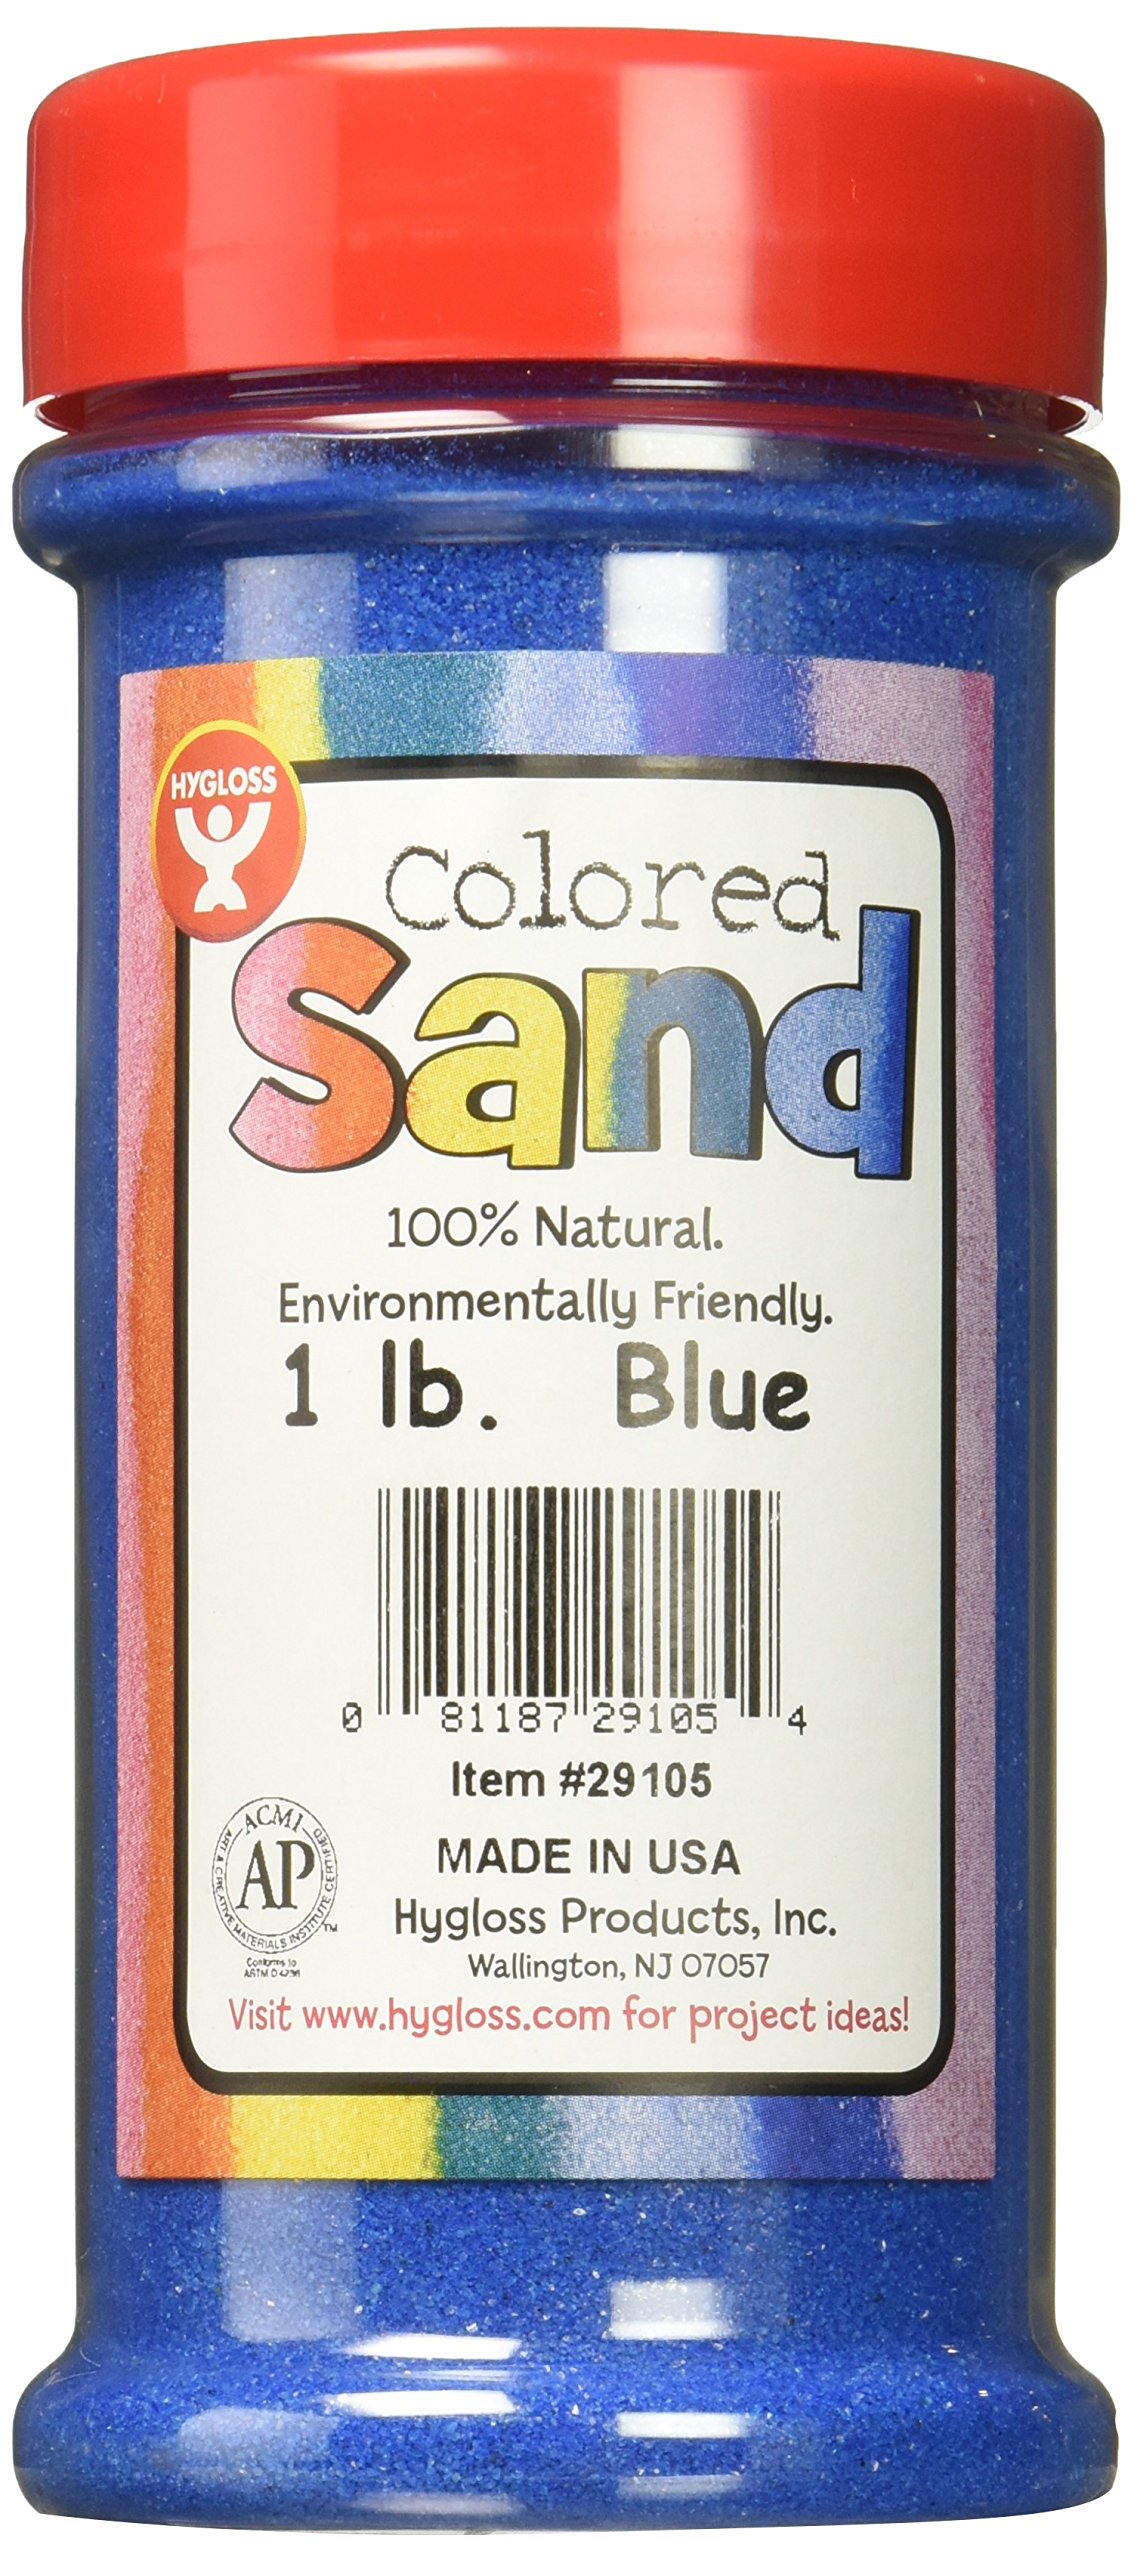 Hygloss Ed Prod Hygloss Products Colored Play Sand - Assorted Colorful Craft Art Bucket O Sand, Blue, 1 Lb